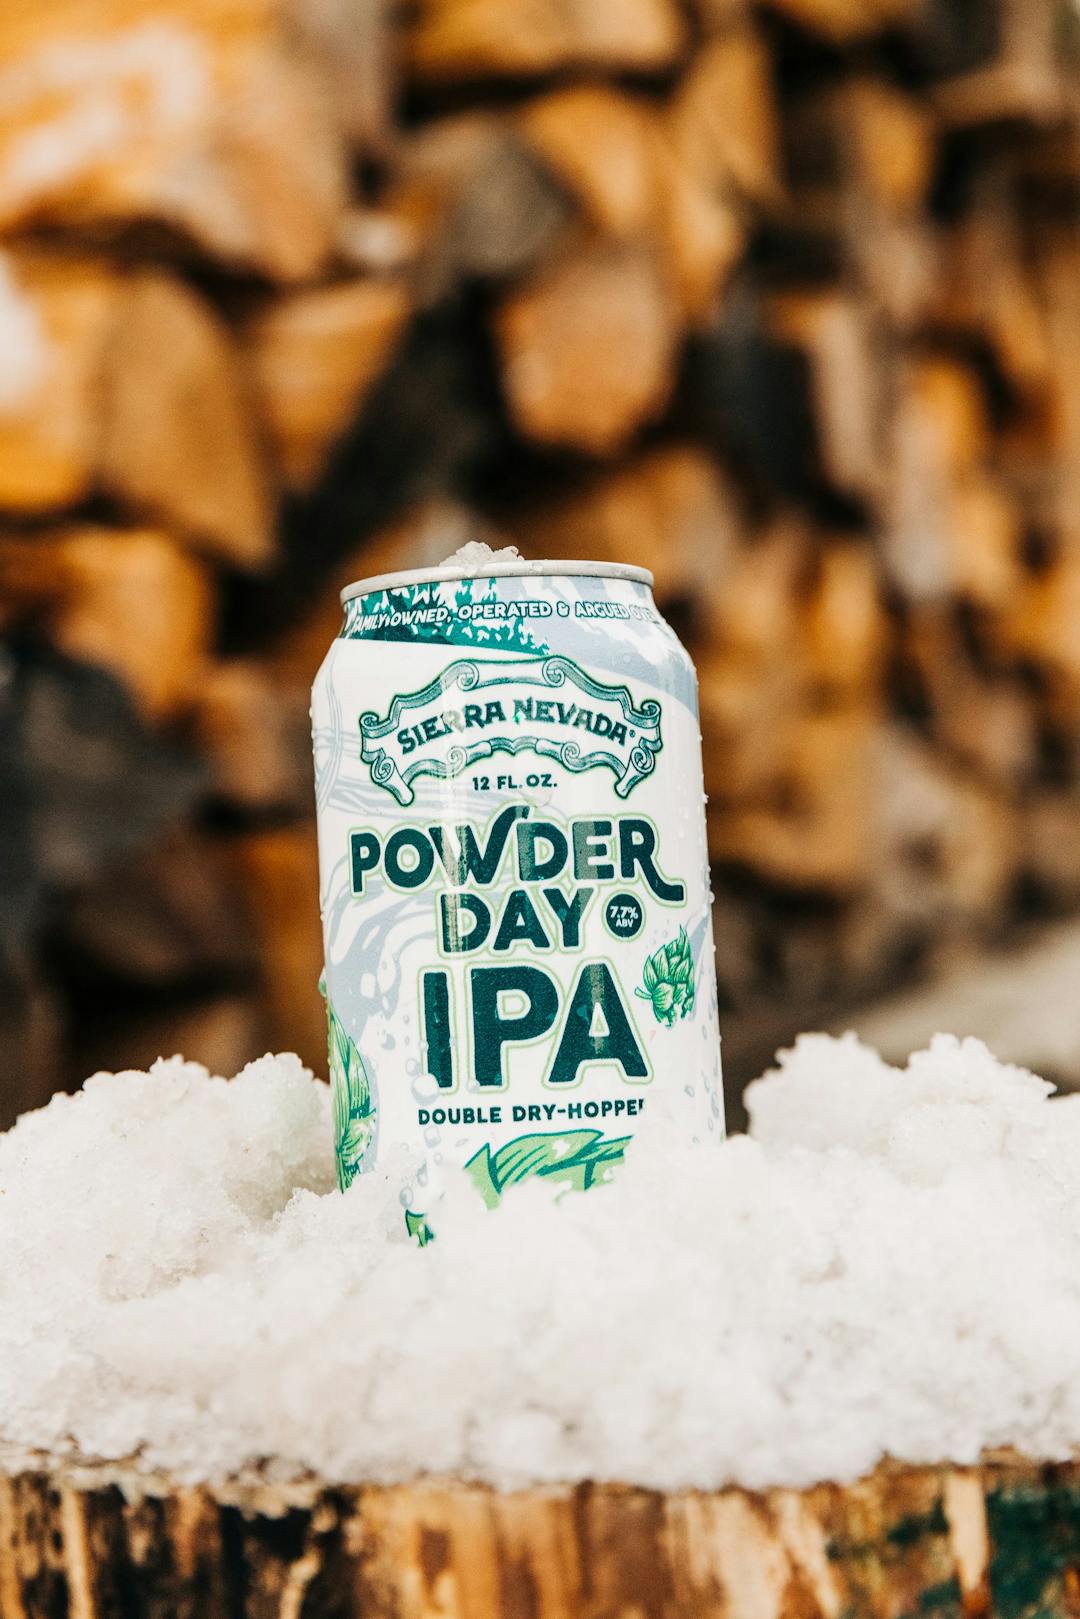 Powder Day IPA beer can on powder